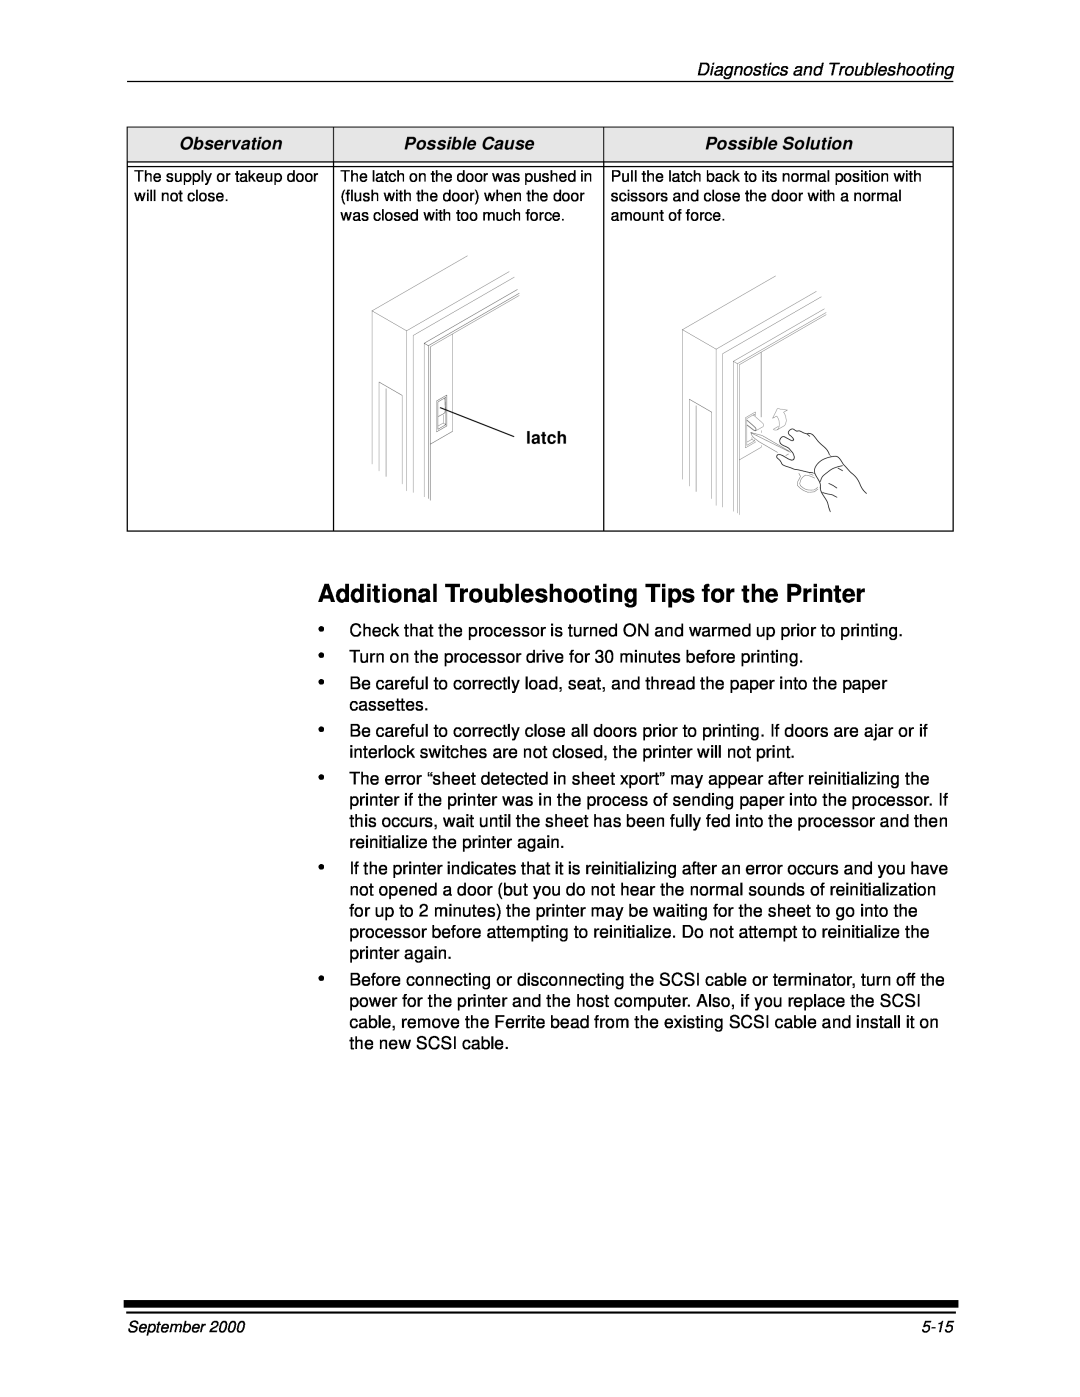 Kodak 20P Additional Troubleshooting Tips for the Printer, Diagnostics and Troubleshooting, Observation, Possible Cause 